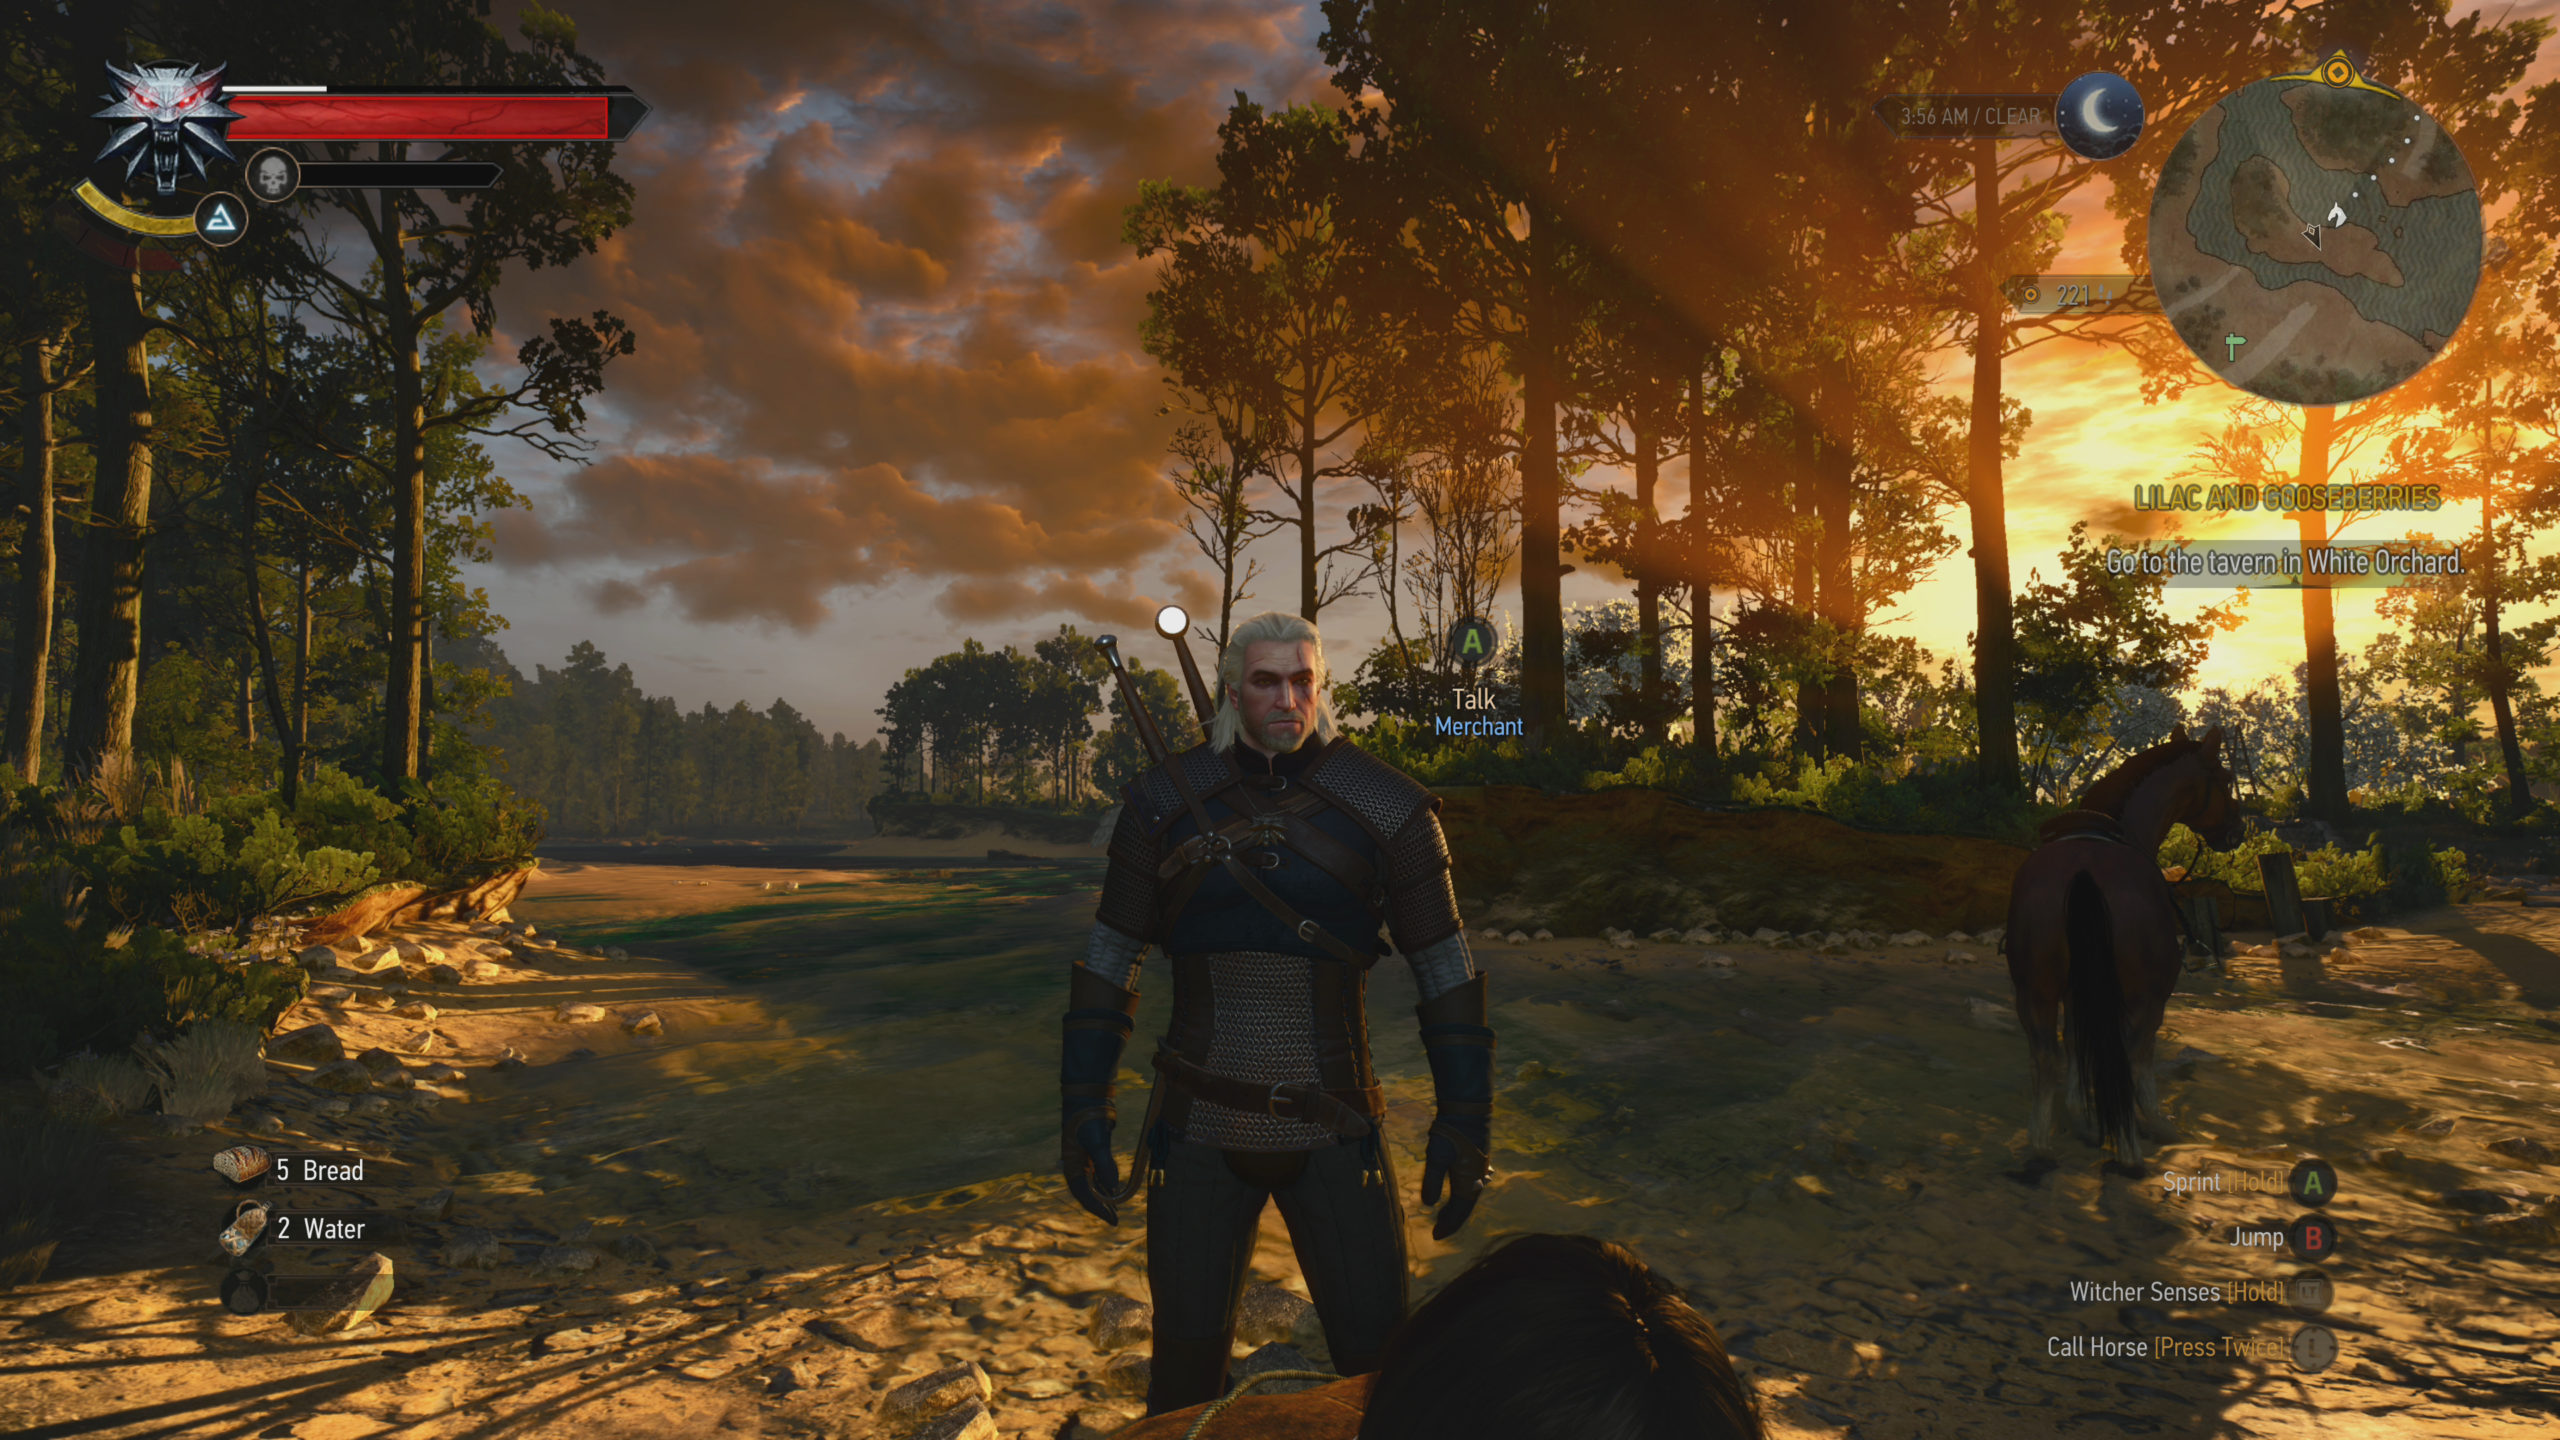 The Witcher 3 Now Officially Runs At 60 FPS On The Xbox One X